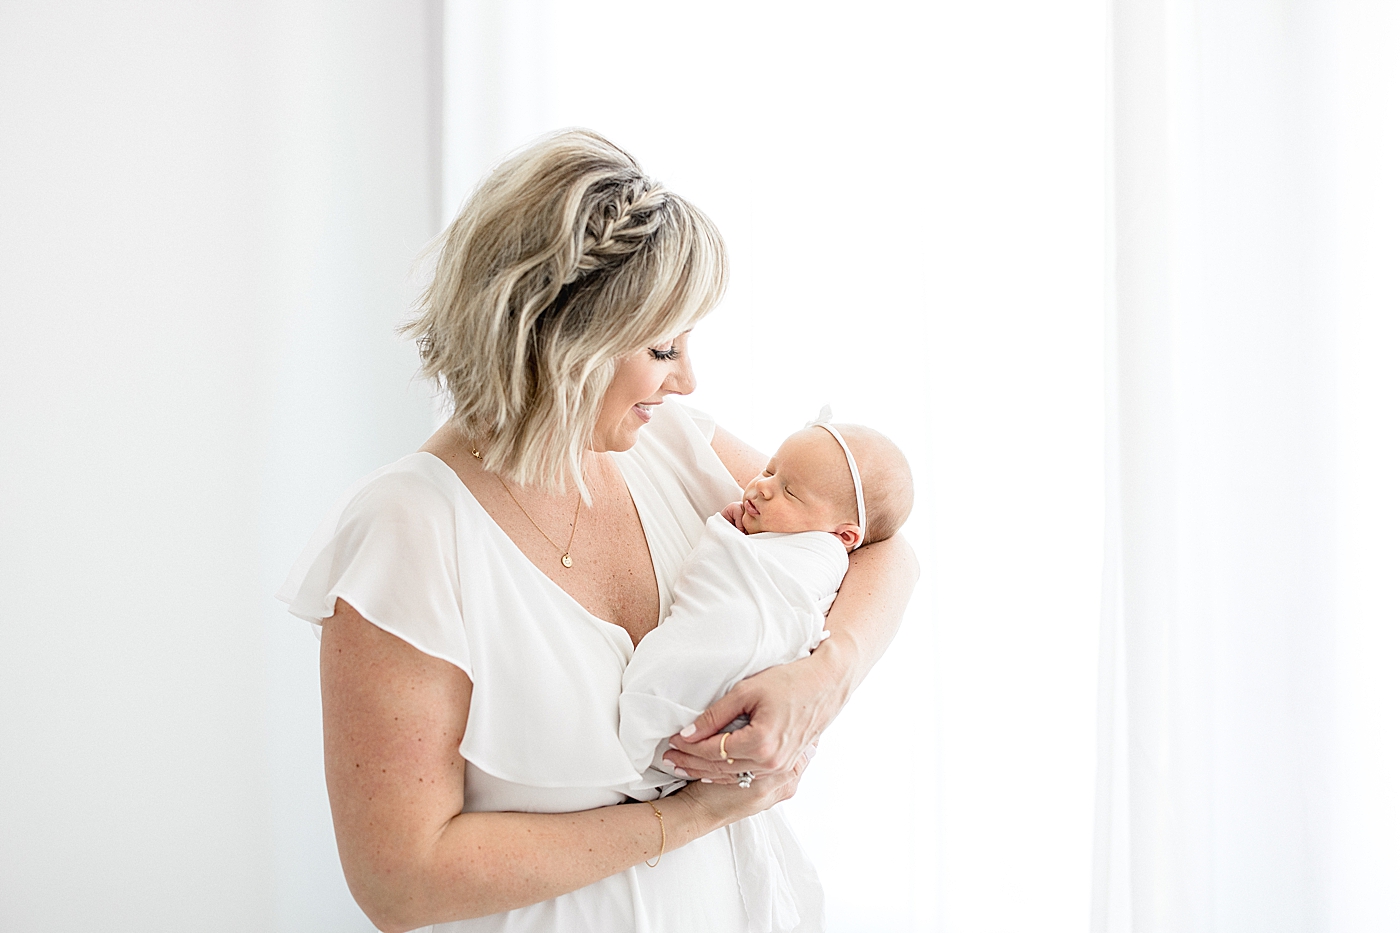 Mom looking at her daughter during baby girl's newborn session in the studio. Photo by Brittany Elise Photography.